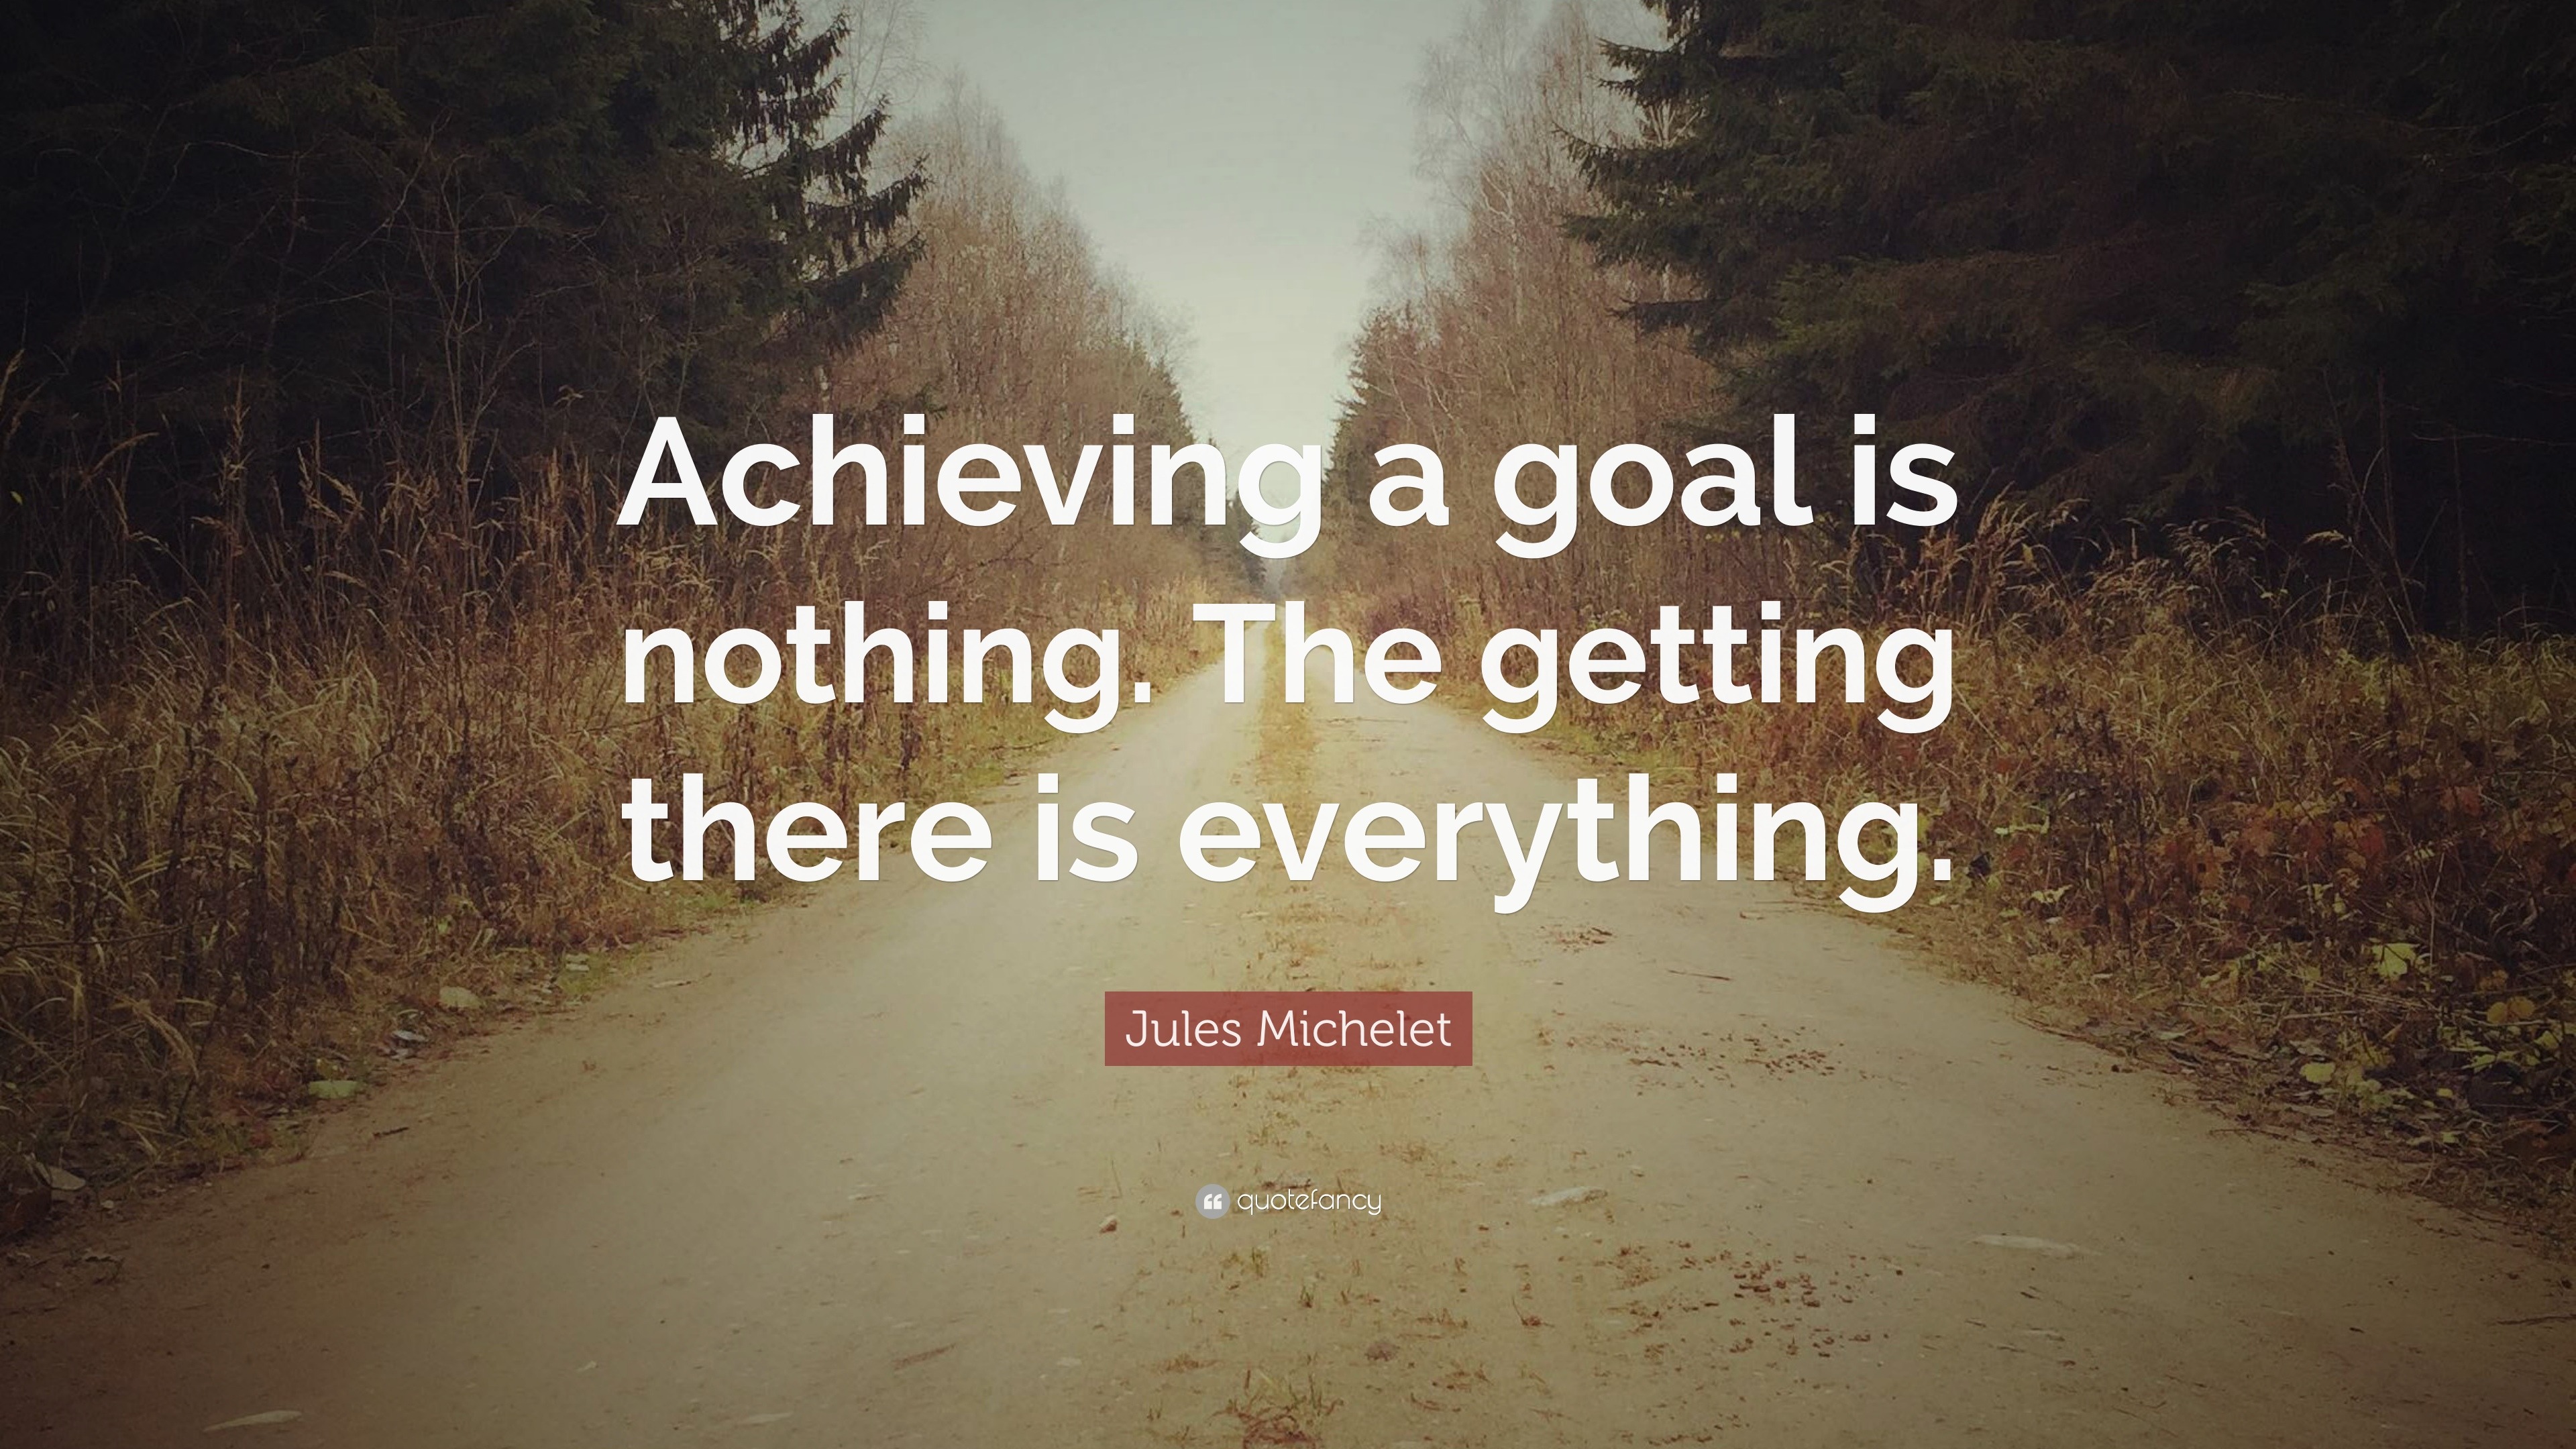 Jules Michelet Quote: “Achieving a goal is nothing. The getting there